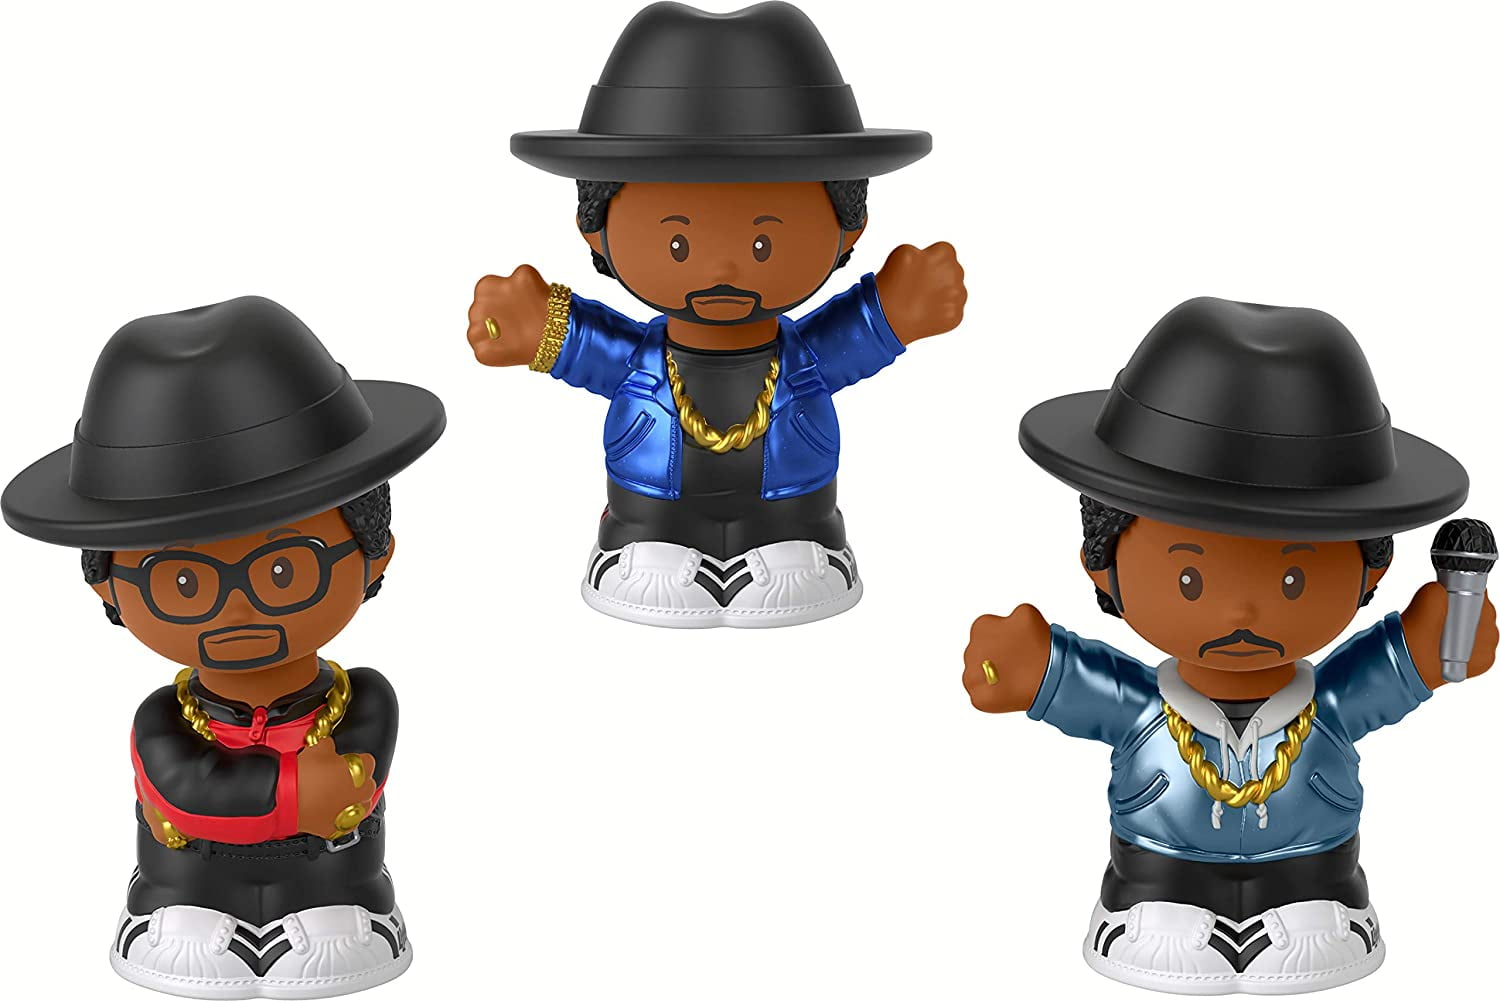 Fisher-Price Little People Collector Run DMC, Set of 3 Figures